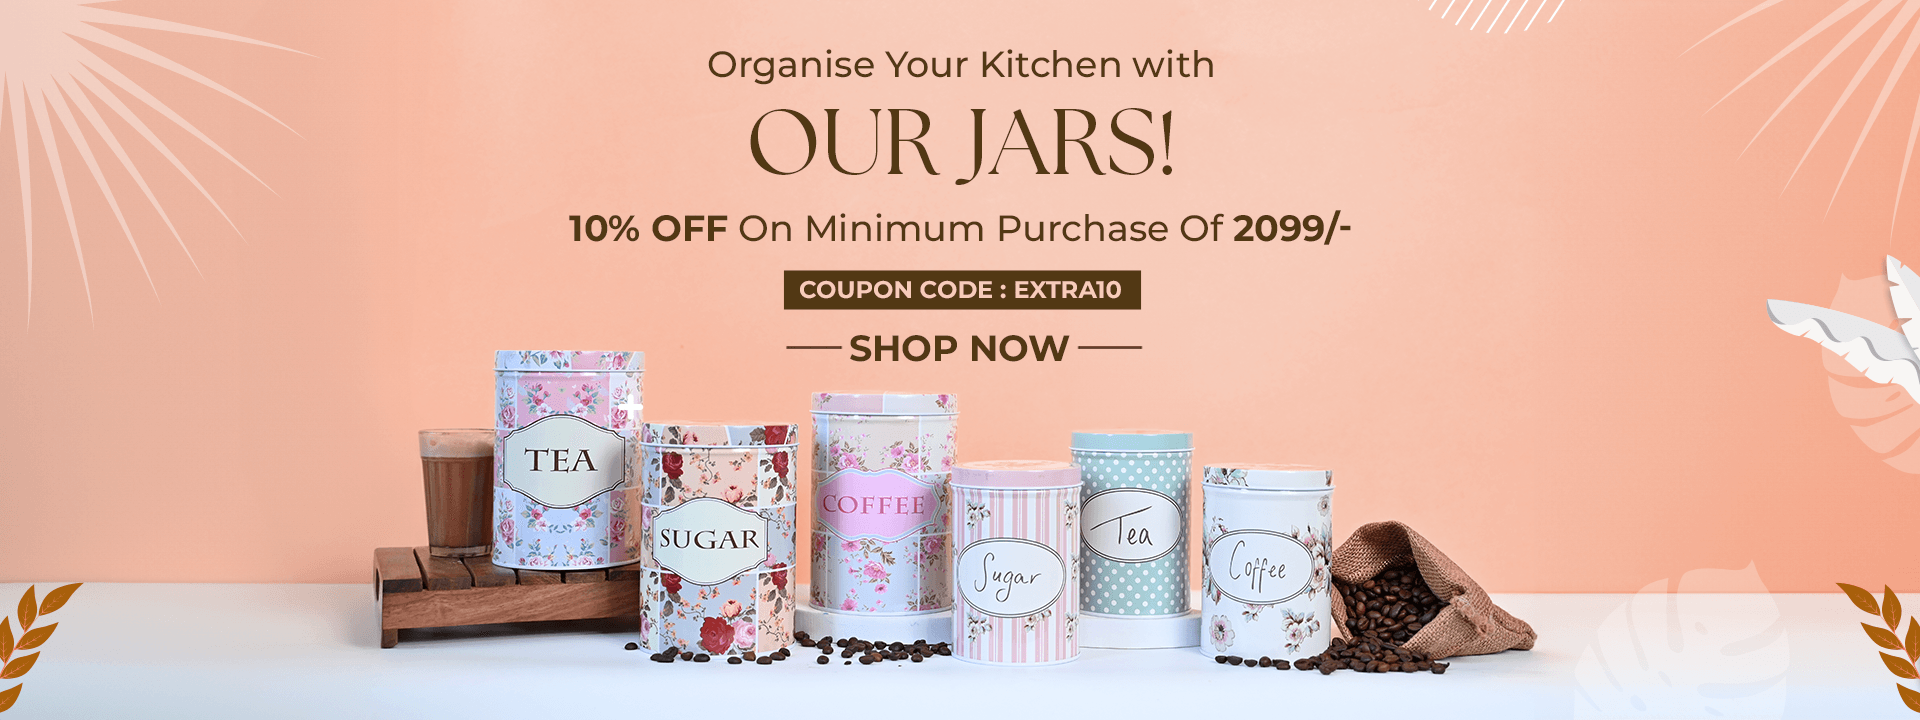 Market99 Organise Your Kitchen With Our jars Online